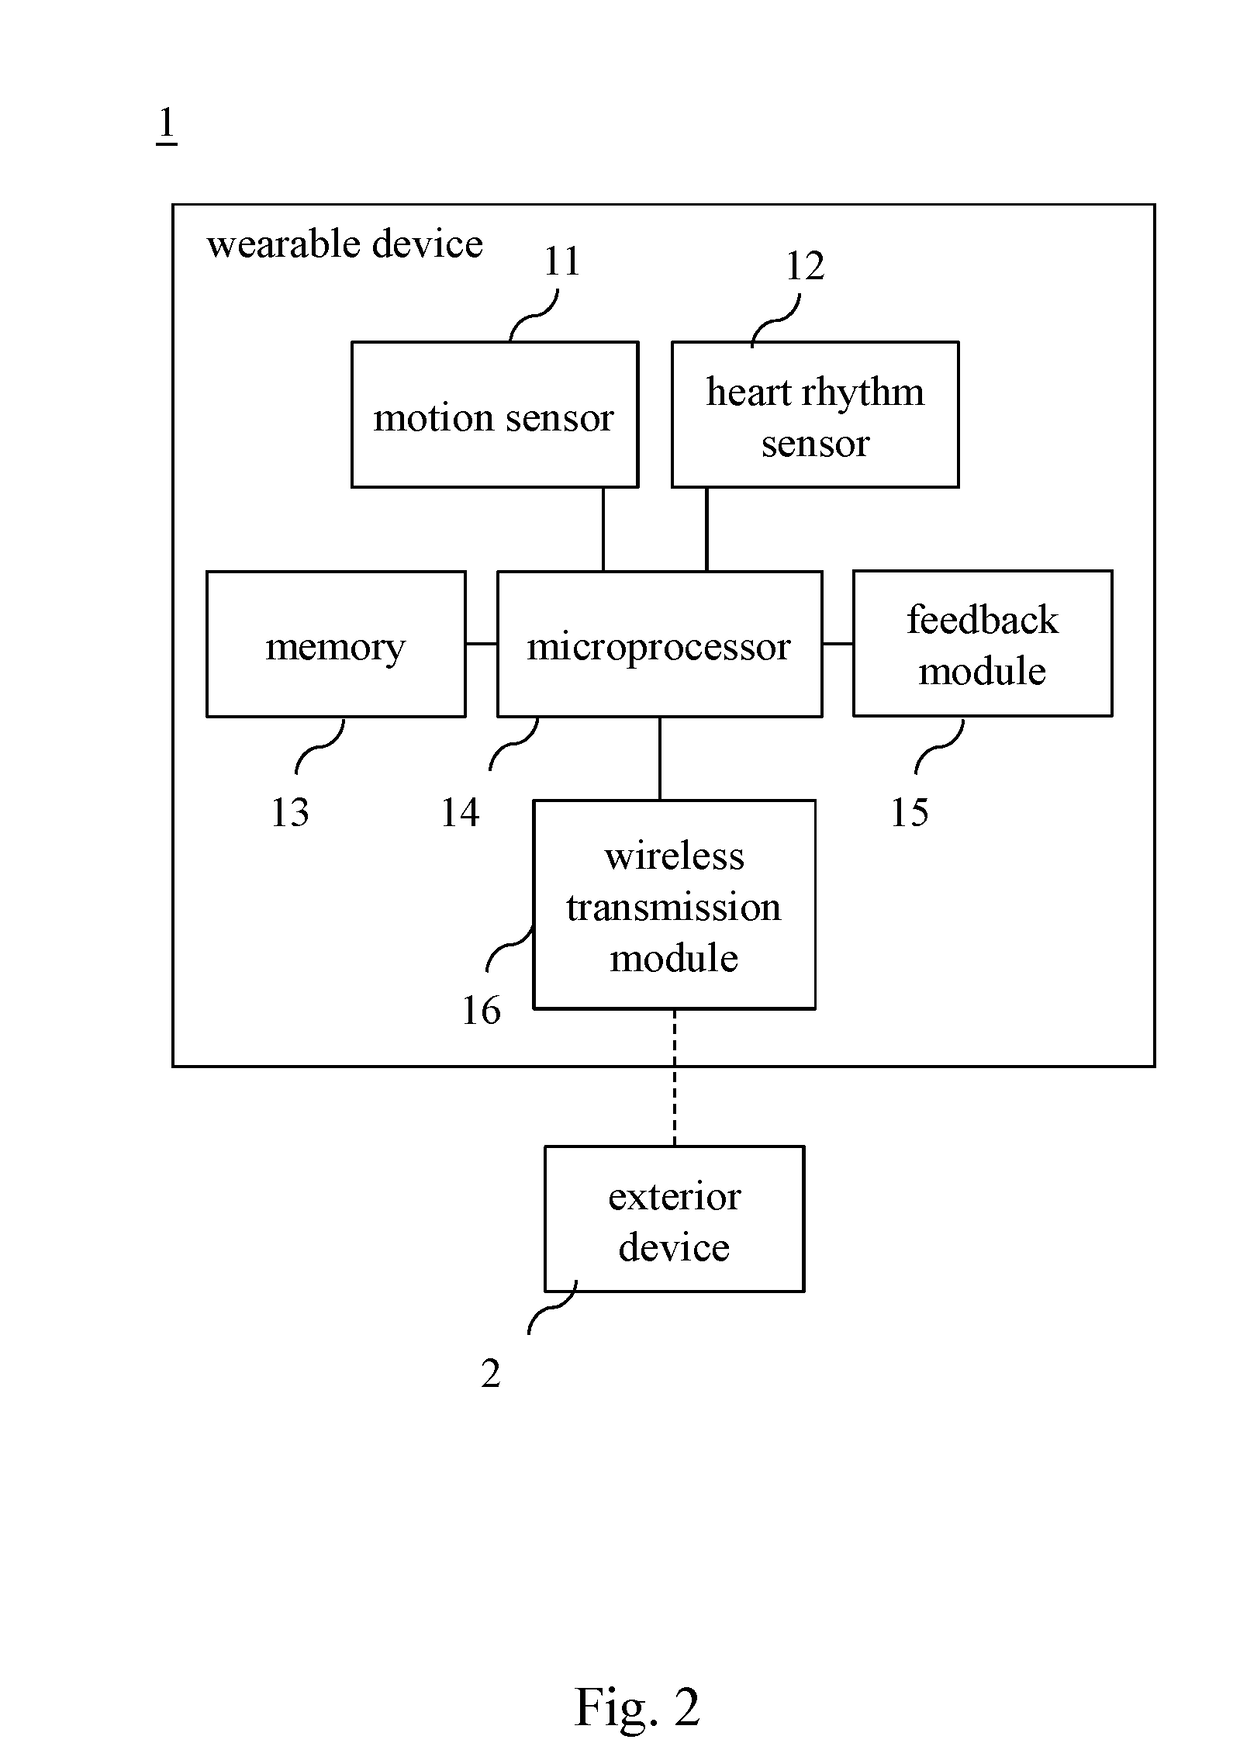 Wearable device which diagnoses personal cardiac health condition by monitoring and analyzing heartbeat and the method thereof